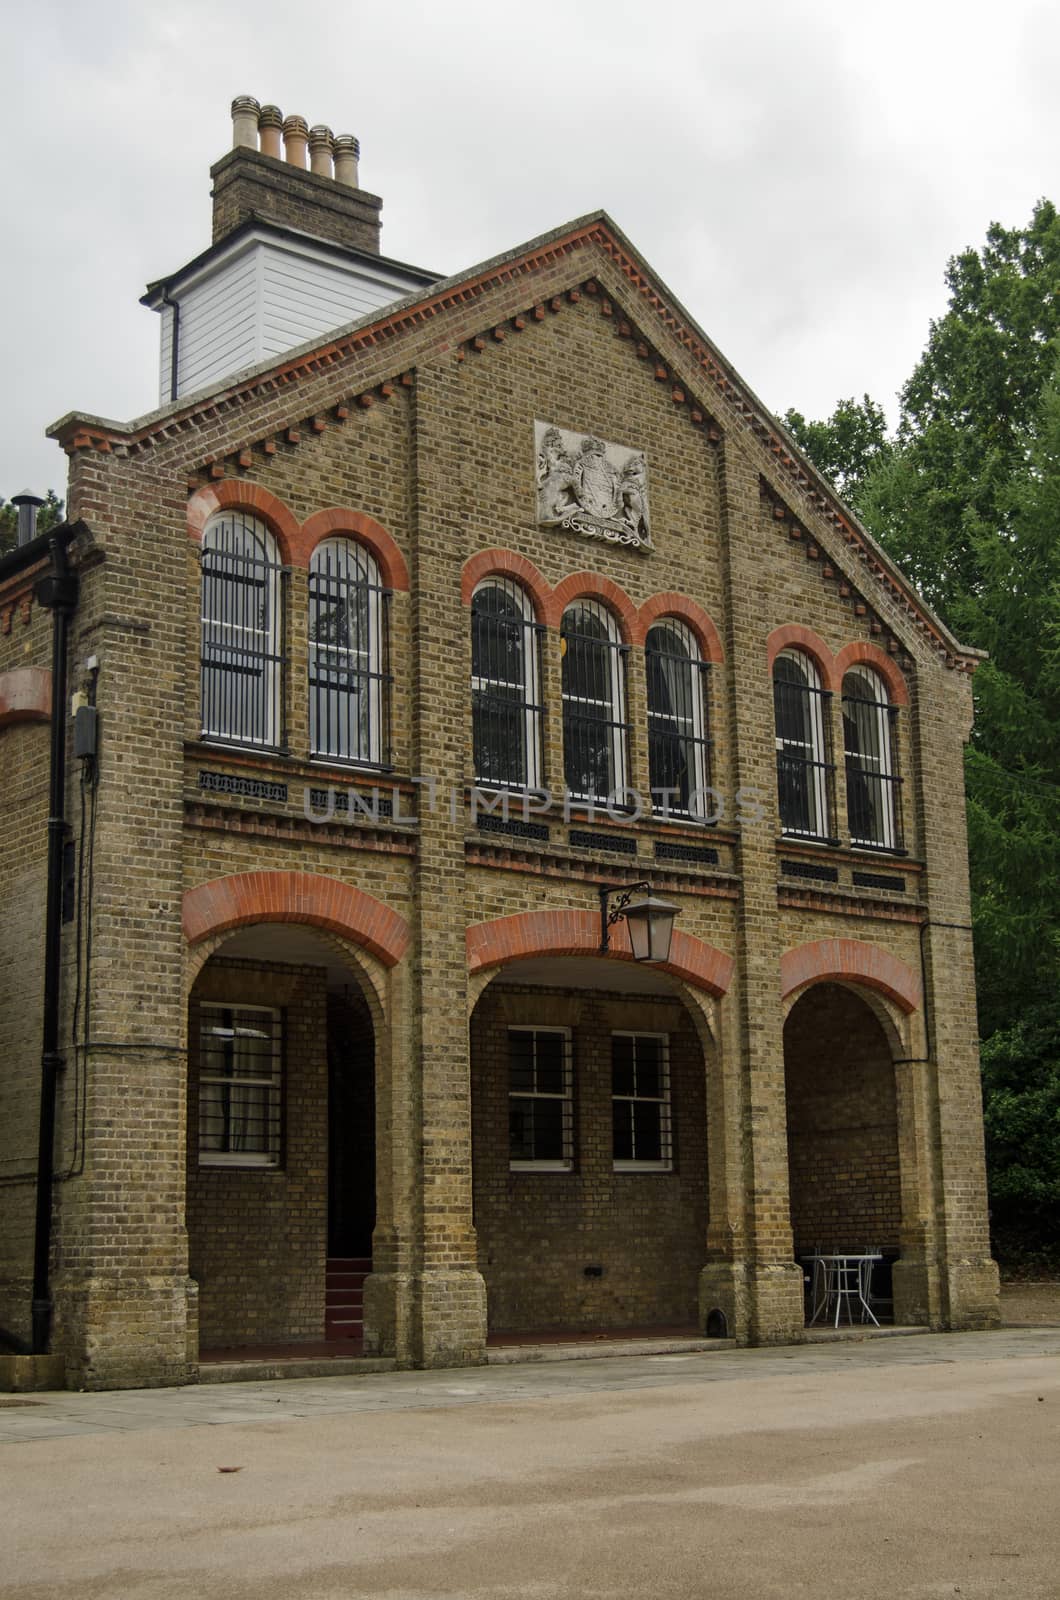 Exterior of the historic Prince Consort Library in Aldershot, Hampshire.  Founded by Prince Albert it holds many maps and books of military interest.